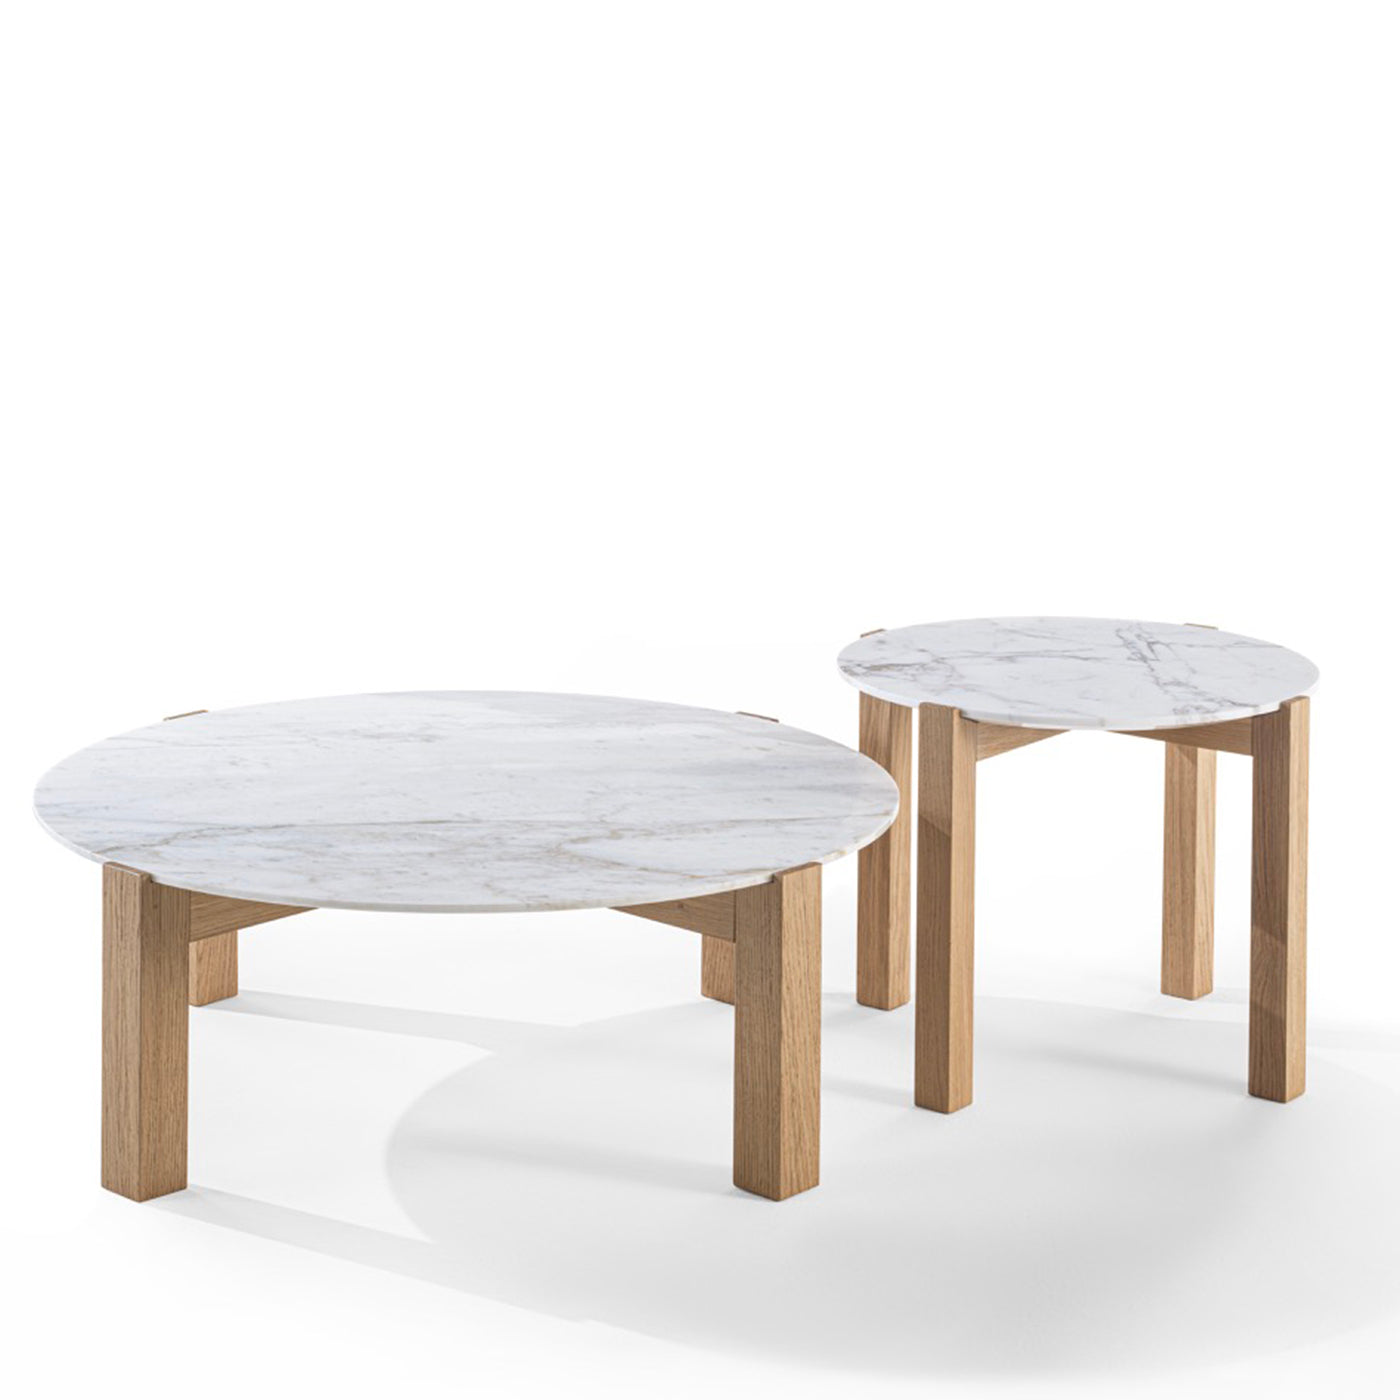 Moon 2 Round White Marble Side Table - Alternative view 4